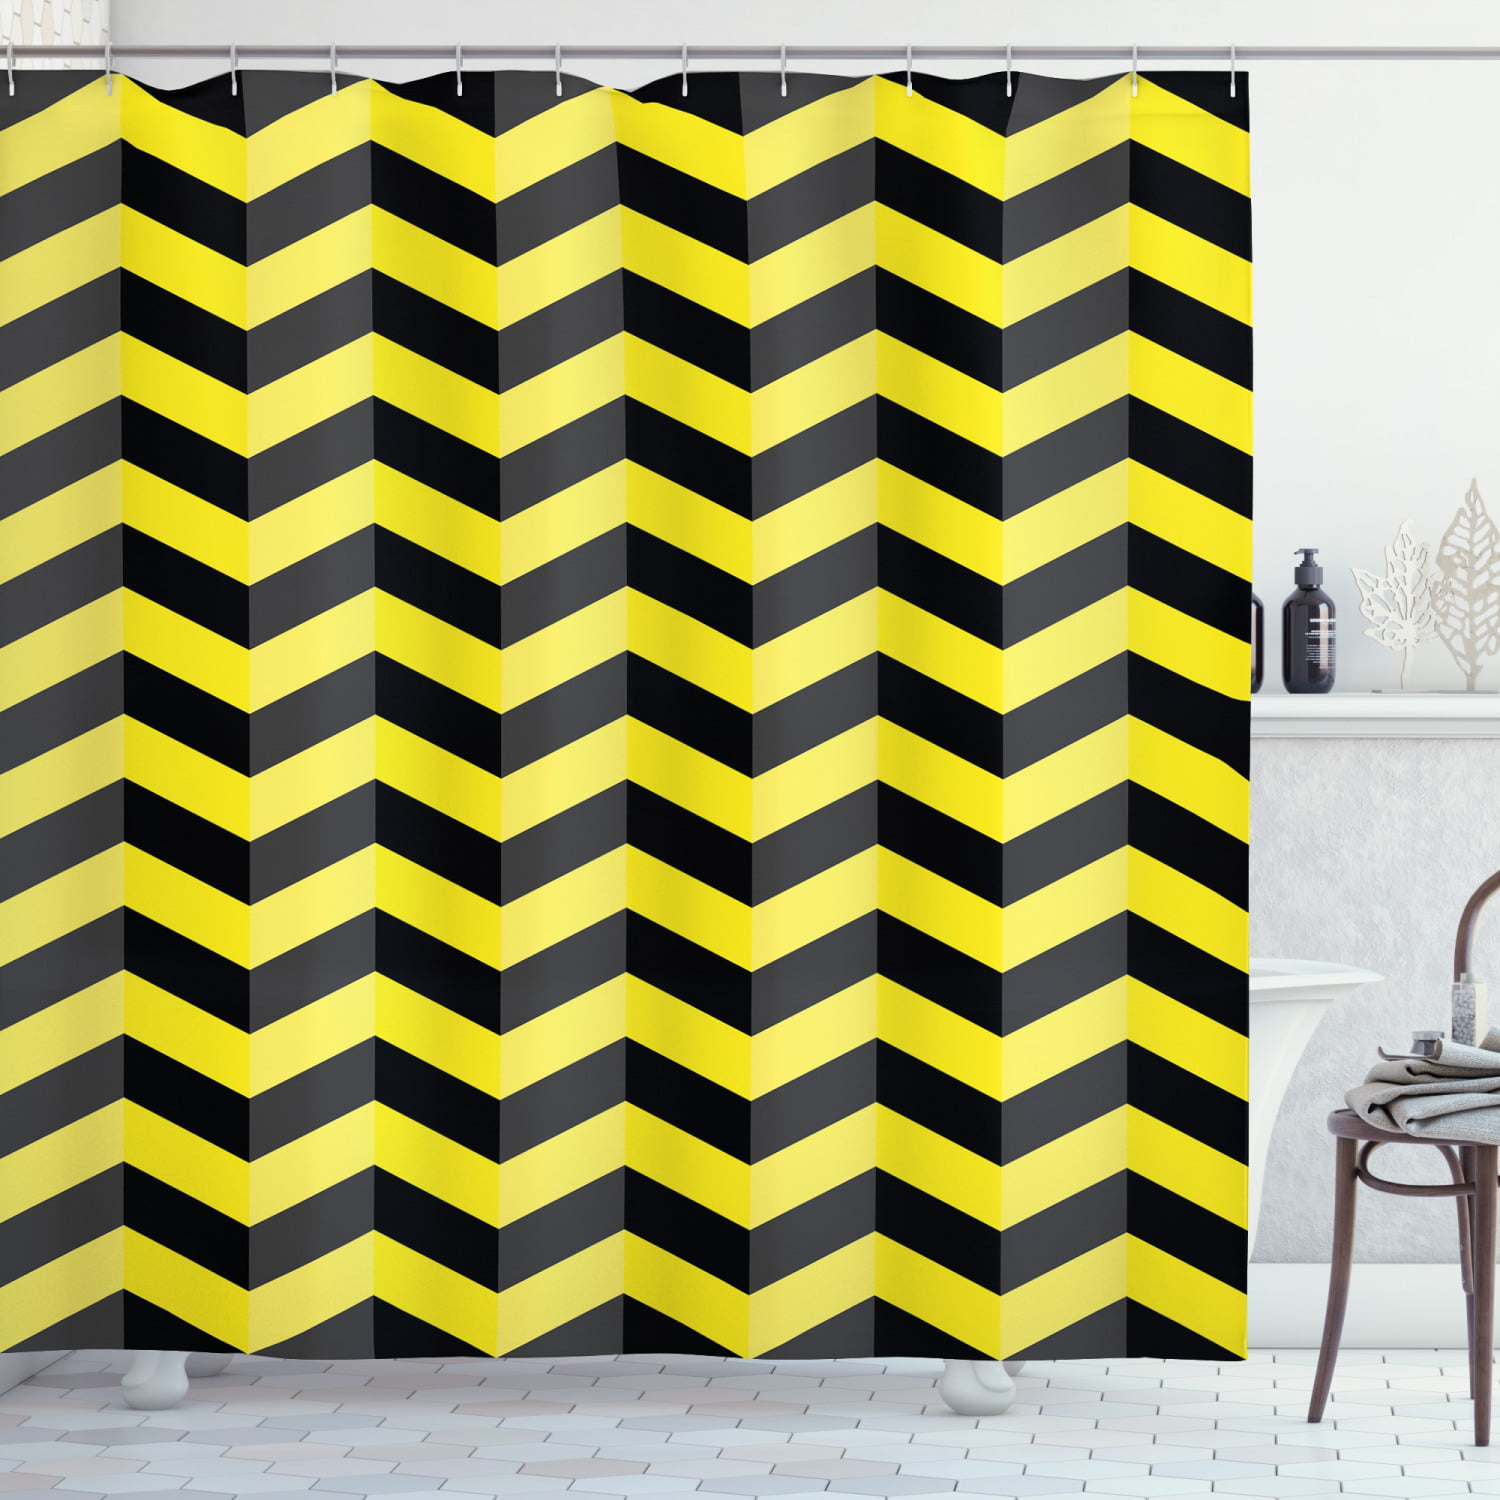 Stripe Chevron and Get Naked Shower Curtain Bathroom Waterproof Polyester Fabric 